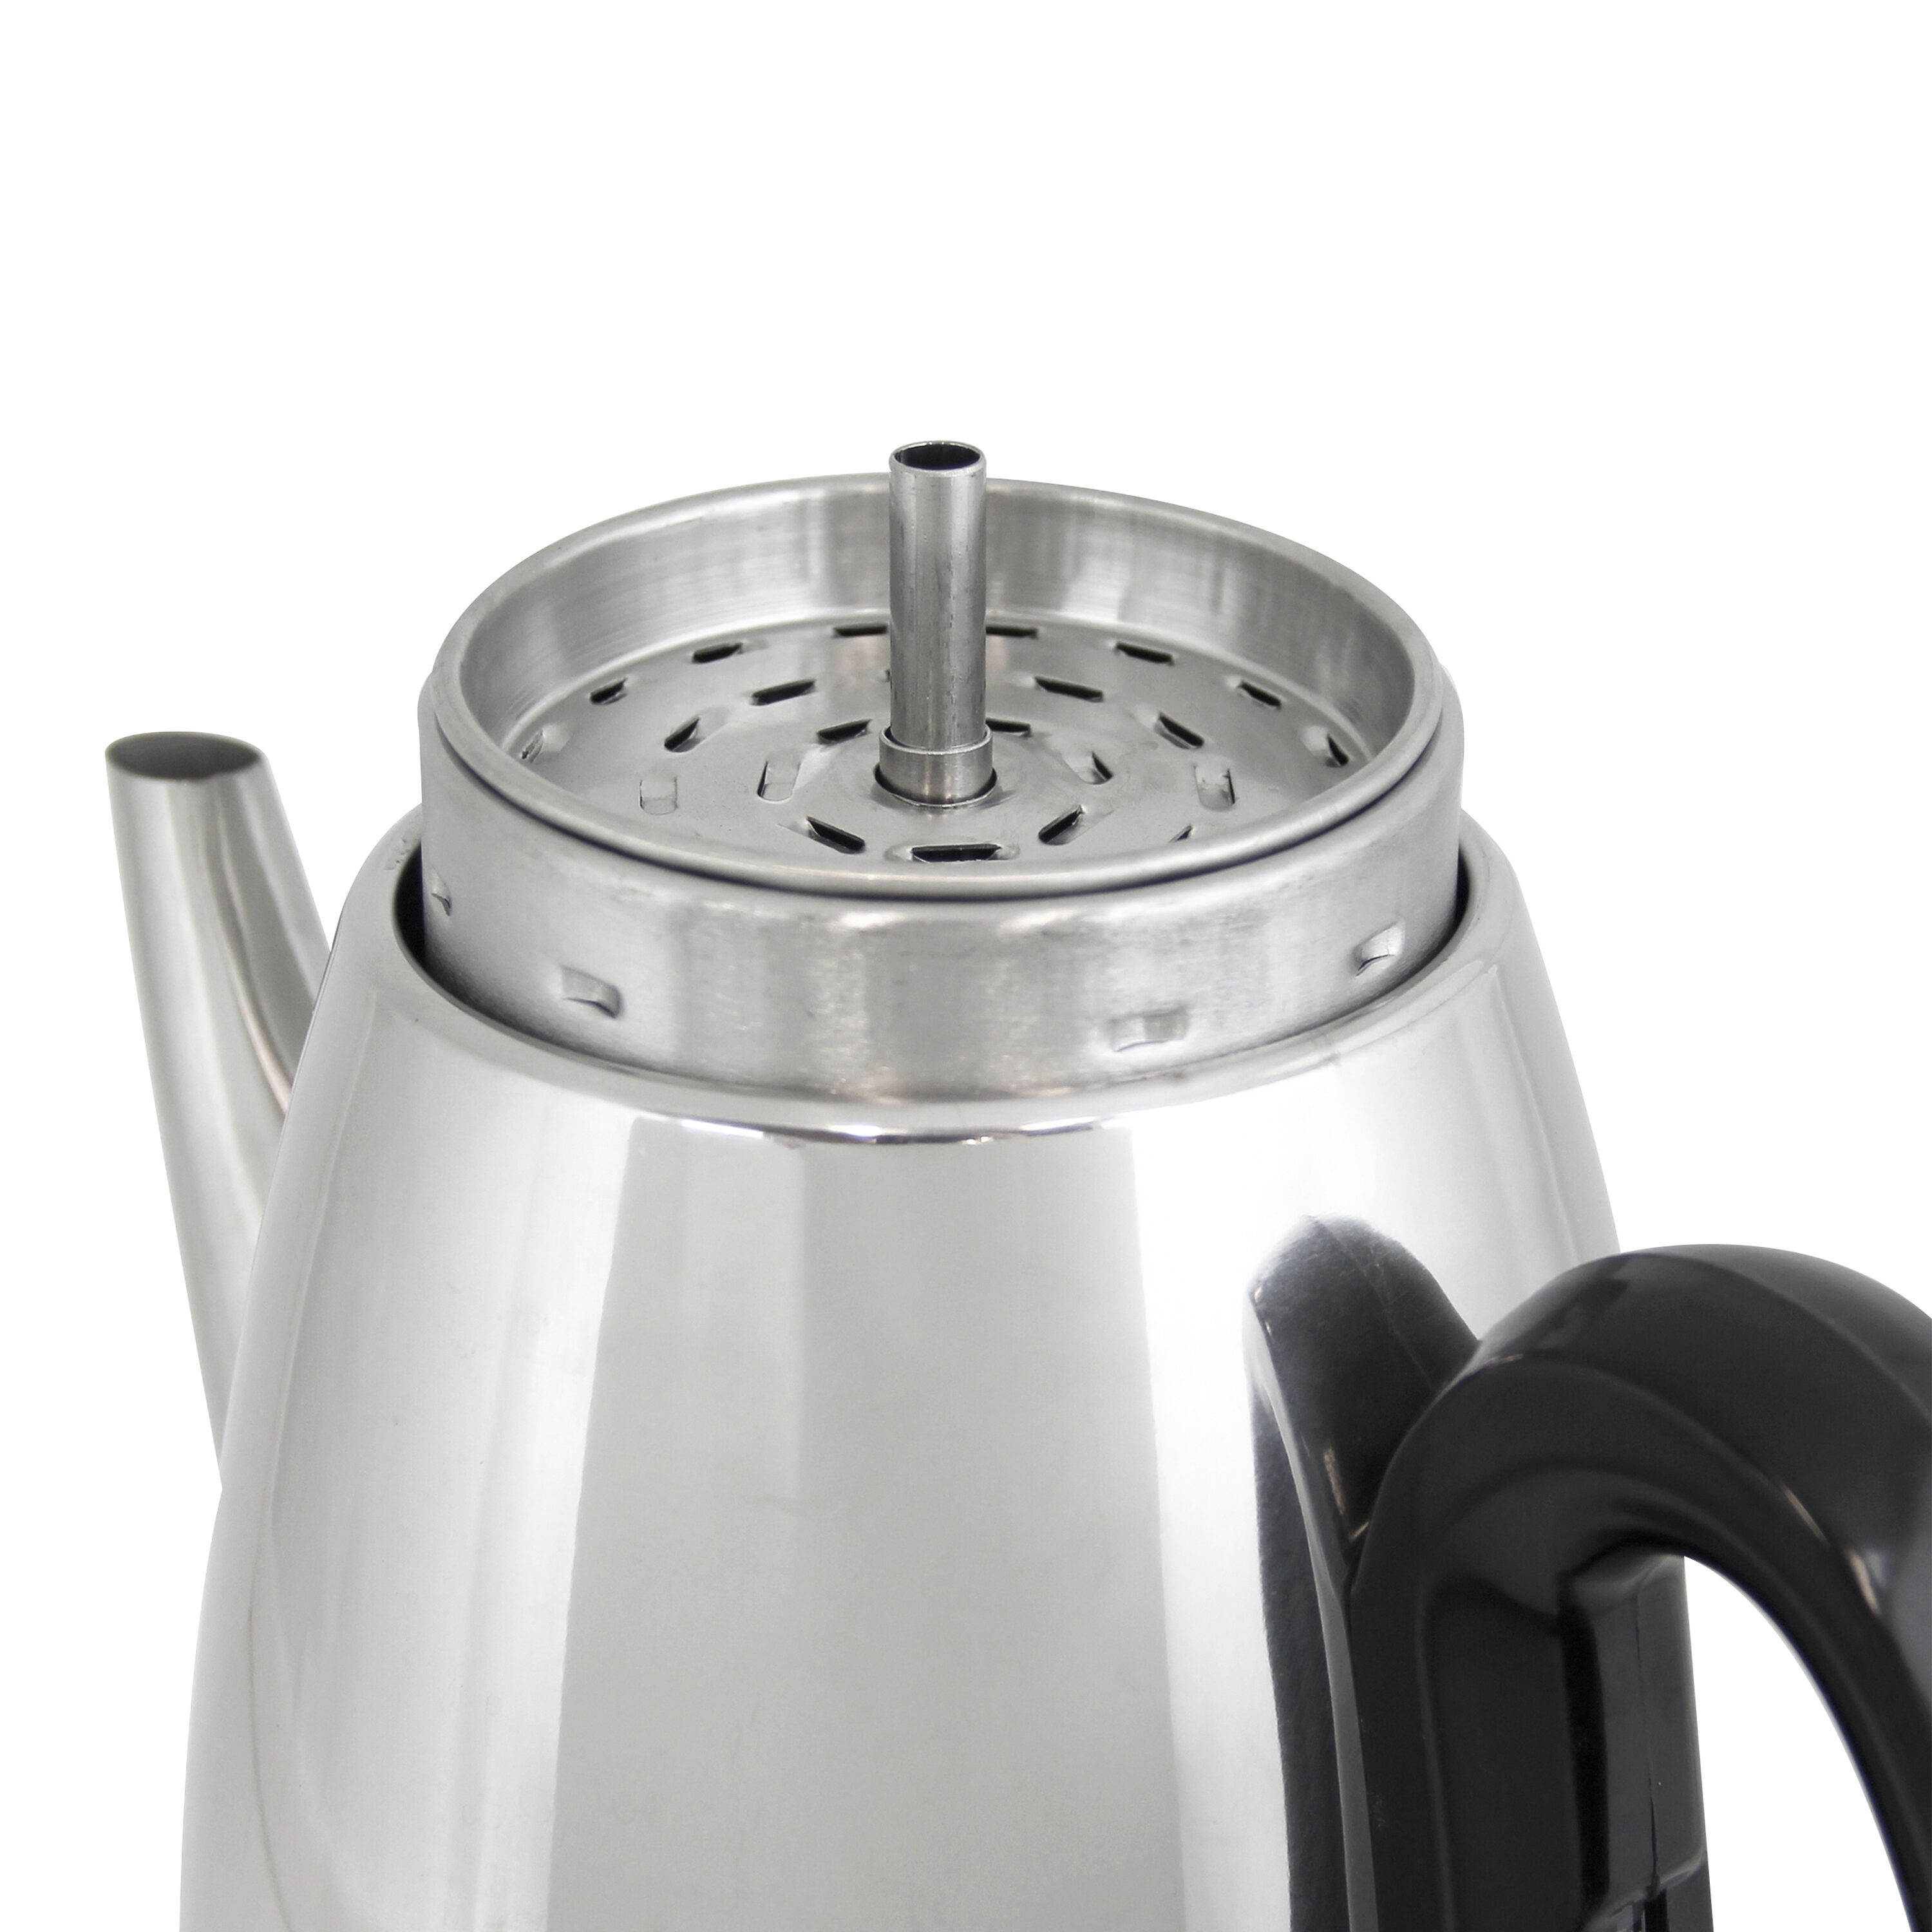 West Bend 12 Cup Hot & Iced Coffee Maker in Stainless Steel